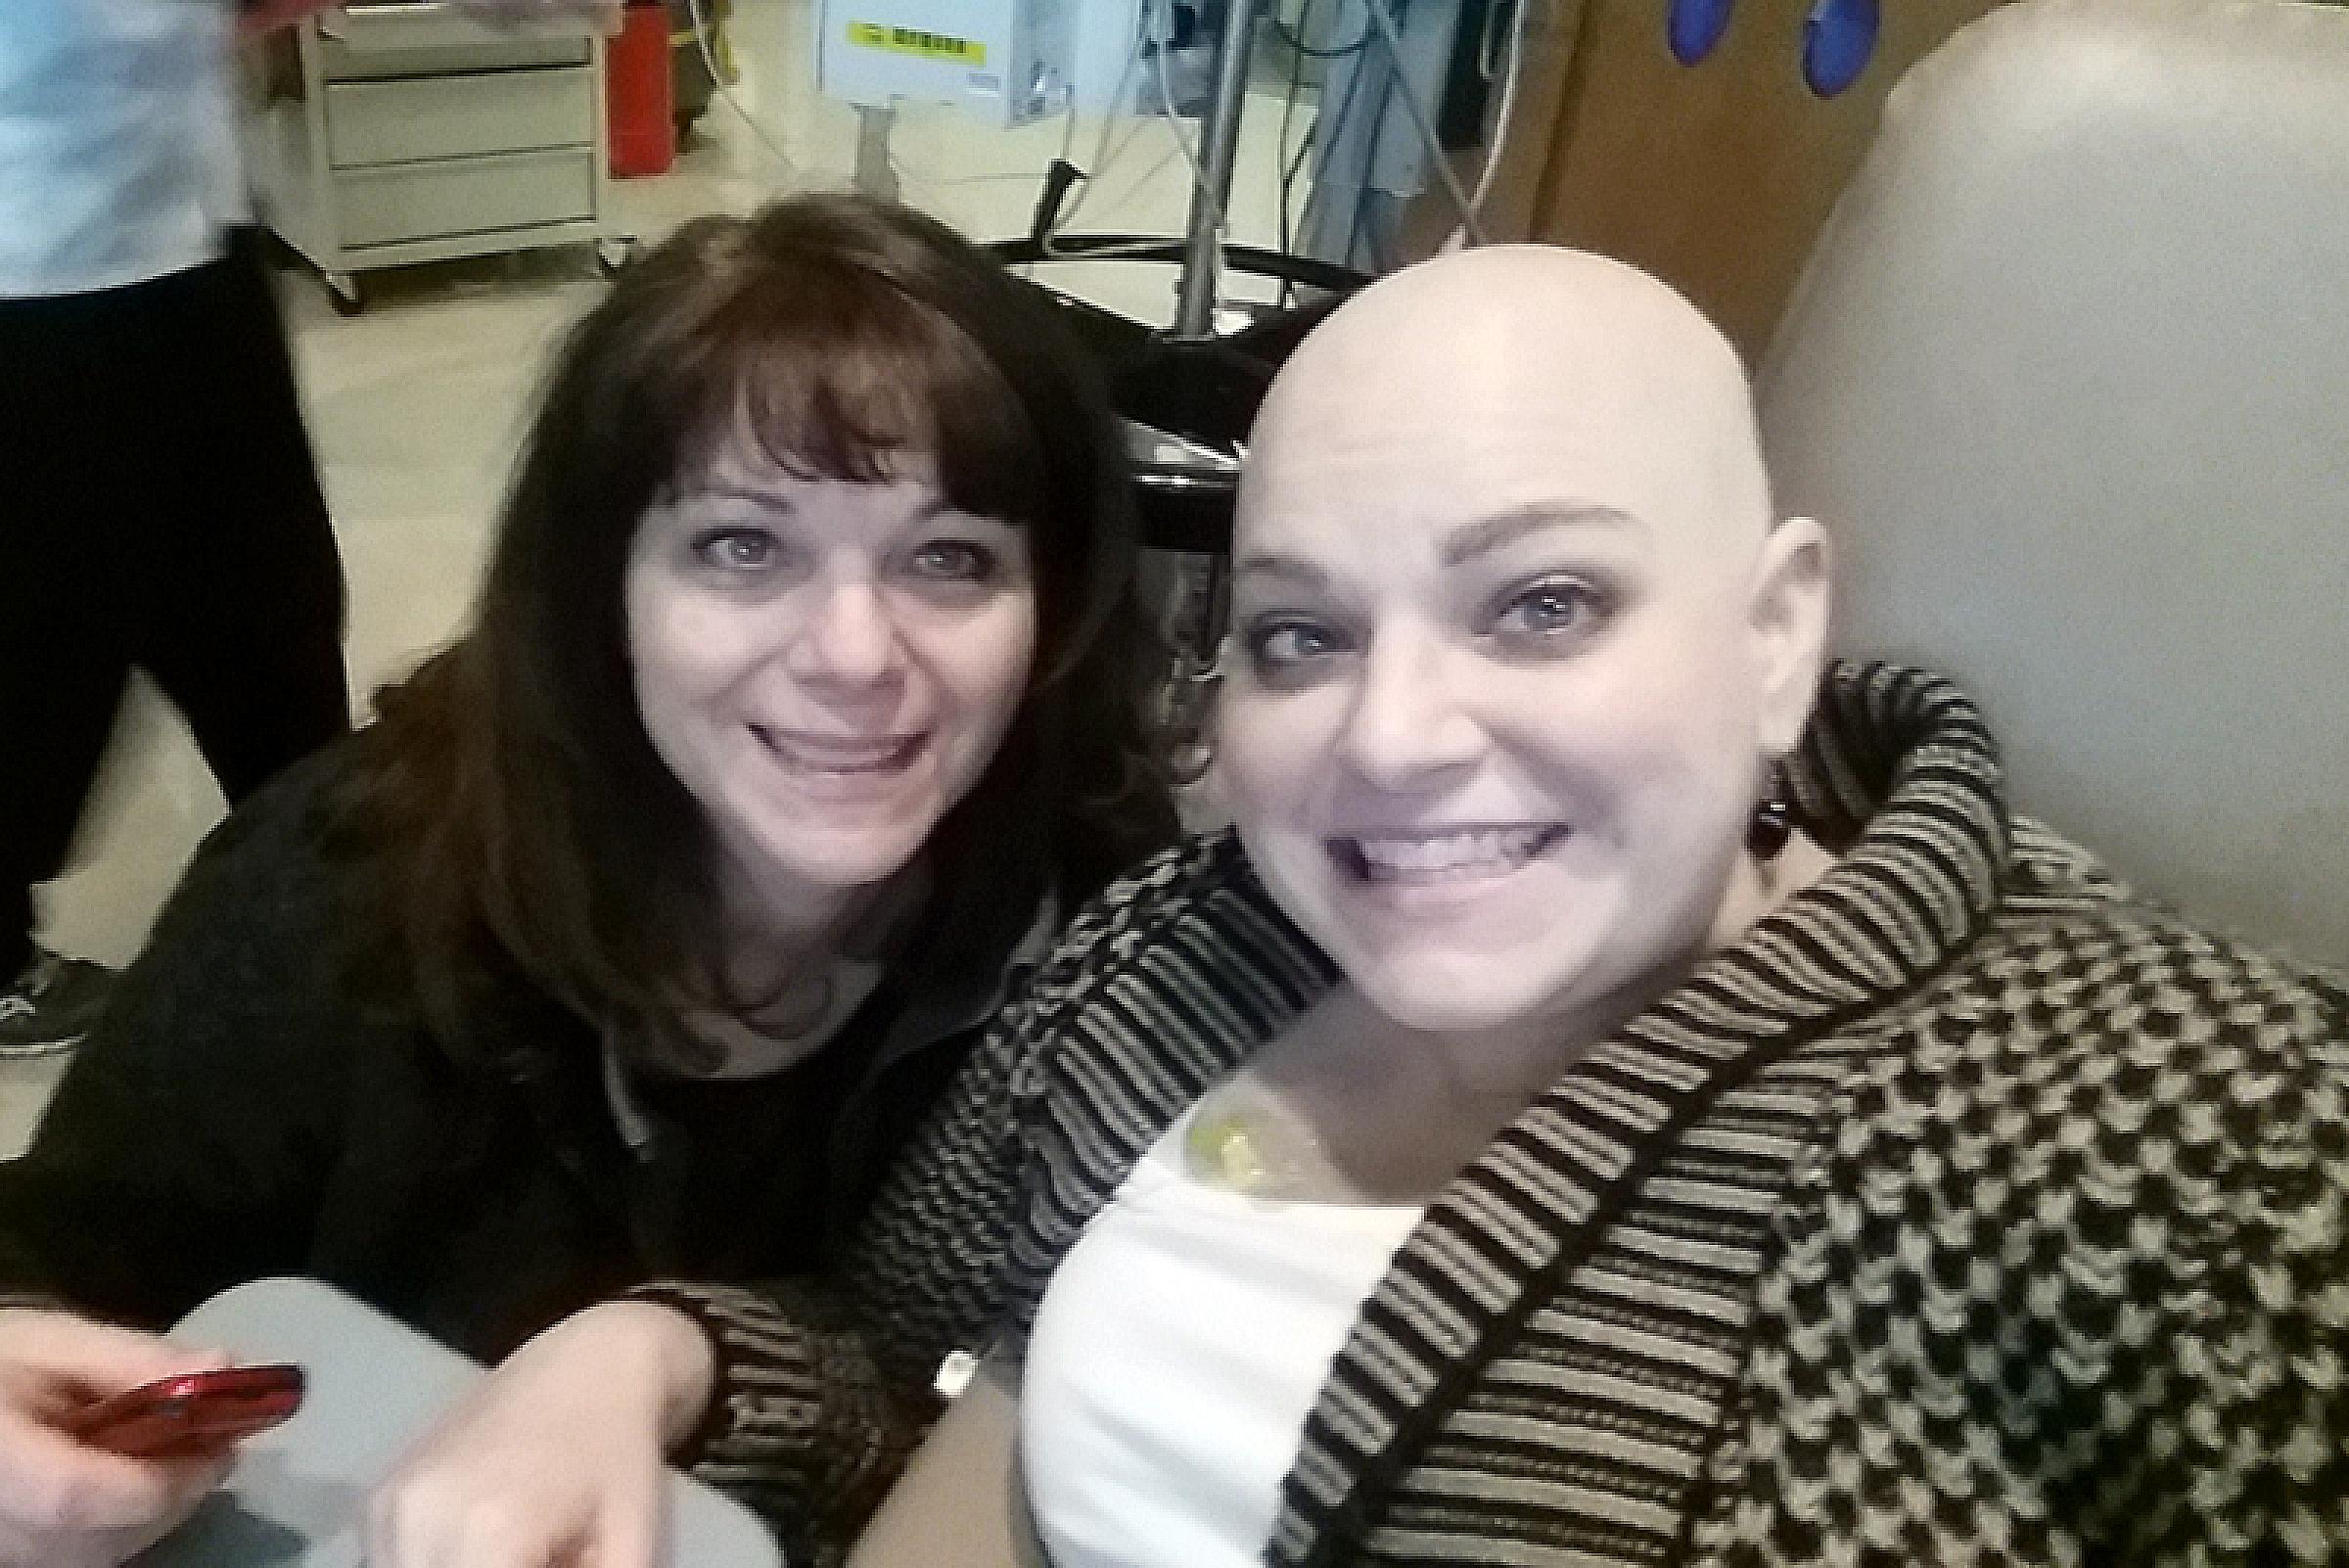 Shelli and her mom taking a selfie during Shelli's chemo treatment